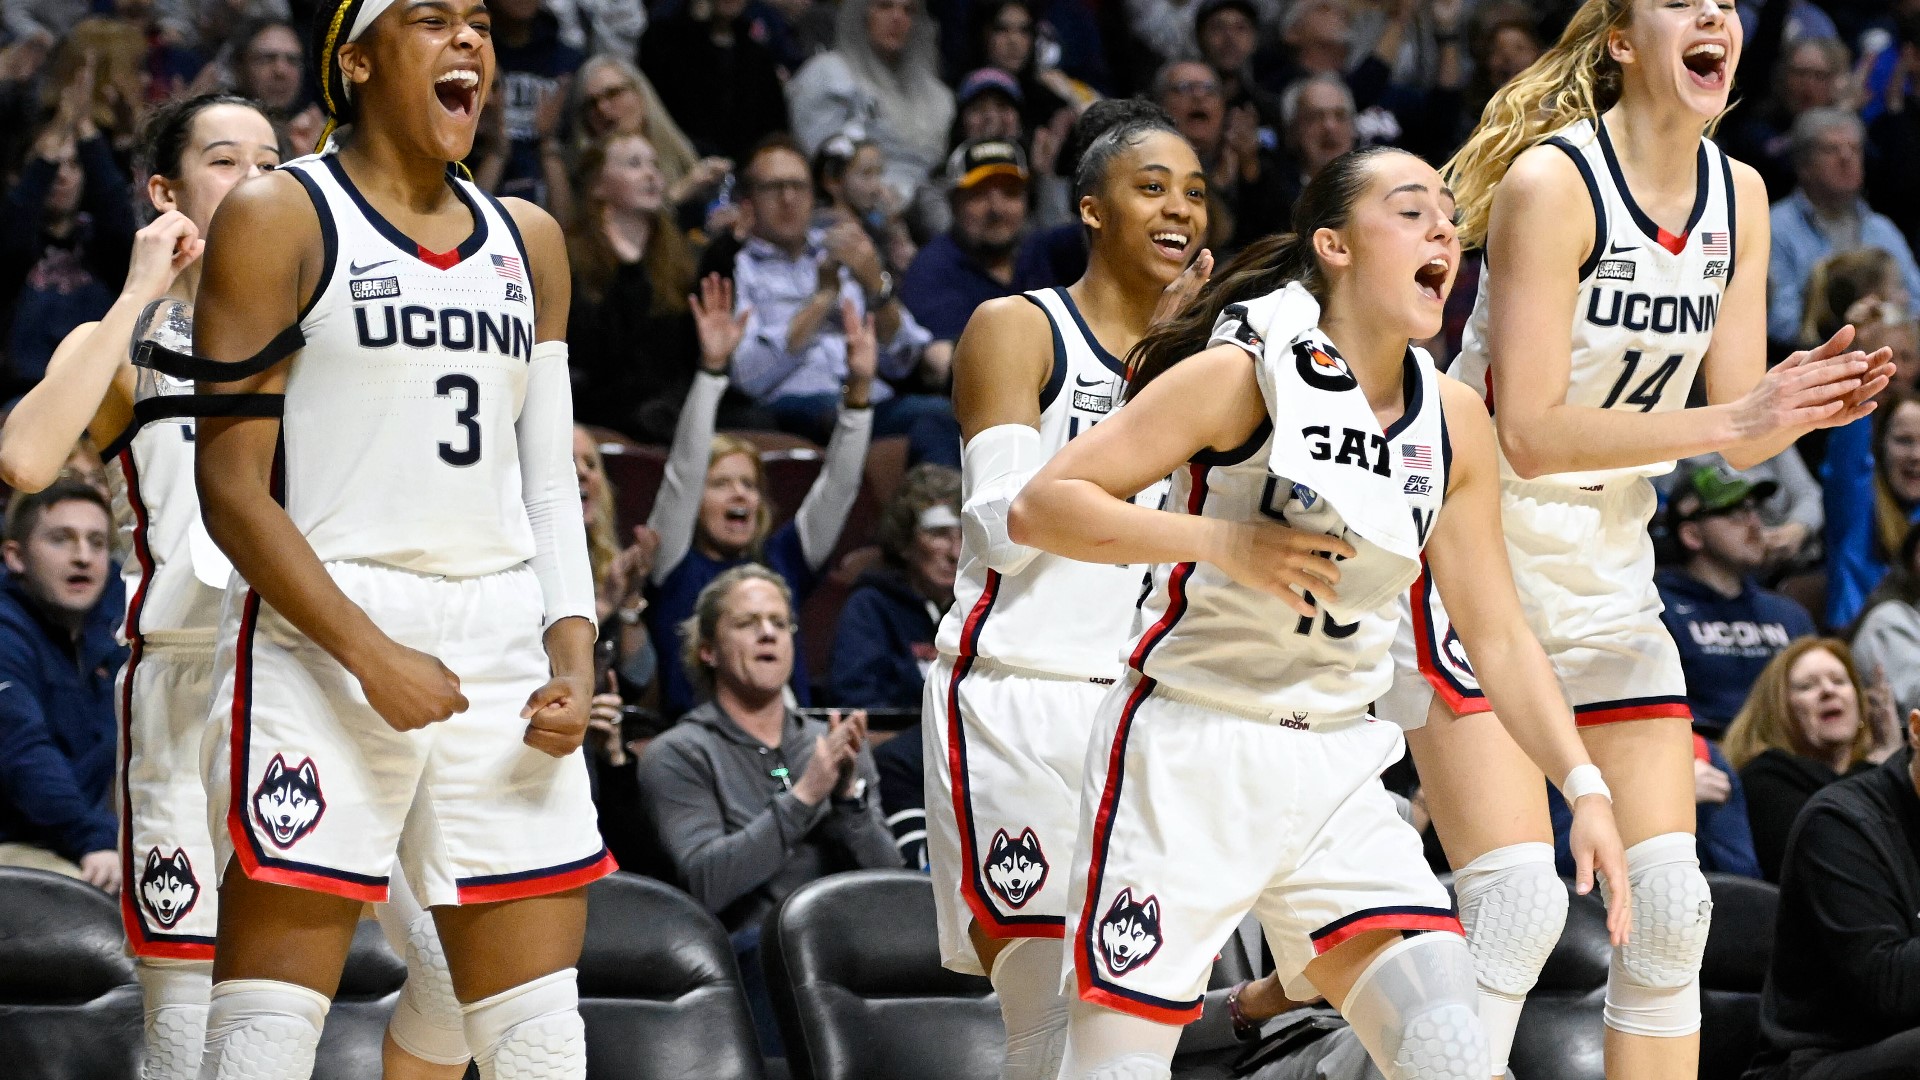 This is the 26th time in Program history the Huskies have been in the Big East Championship. They will take on Villanova on Monday.